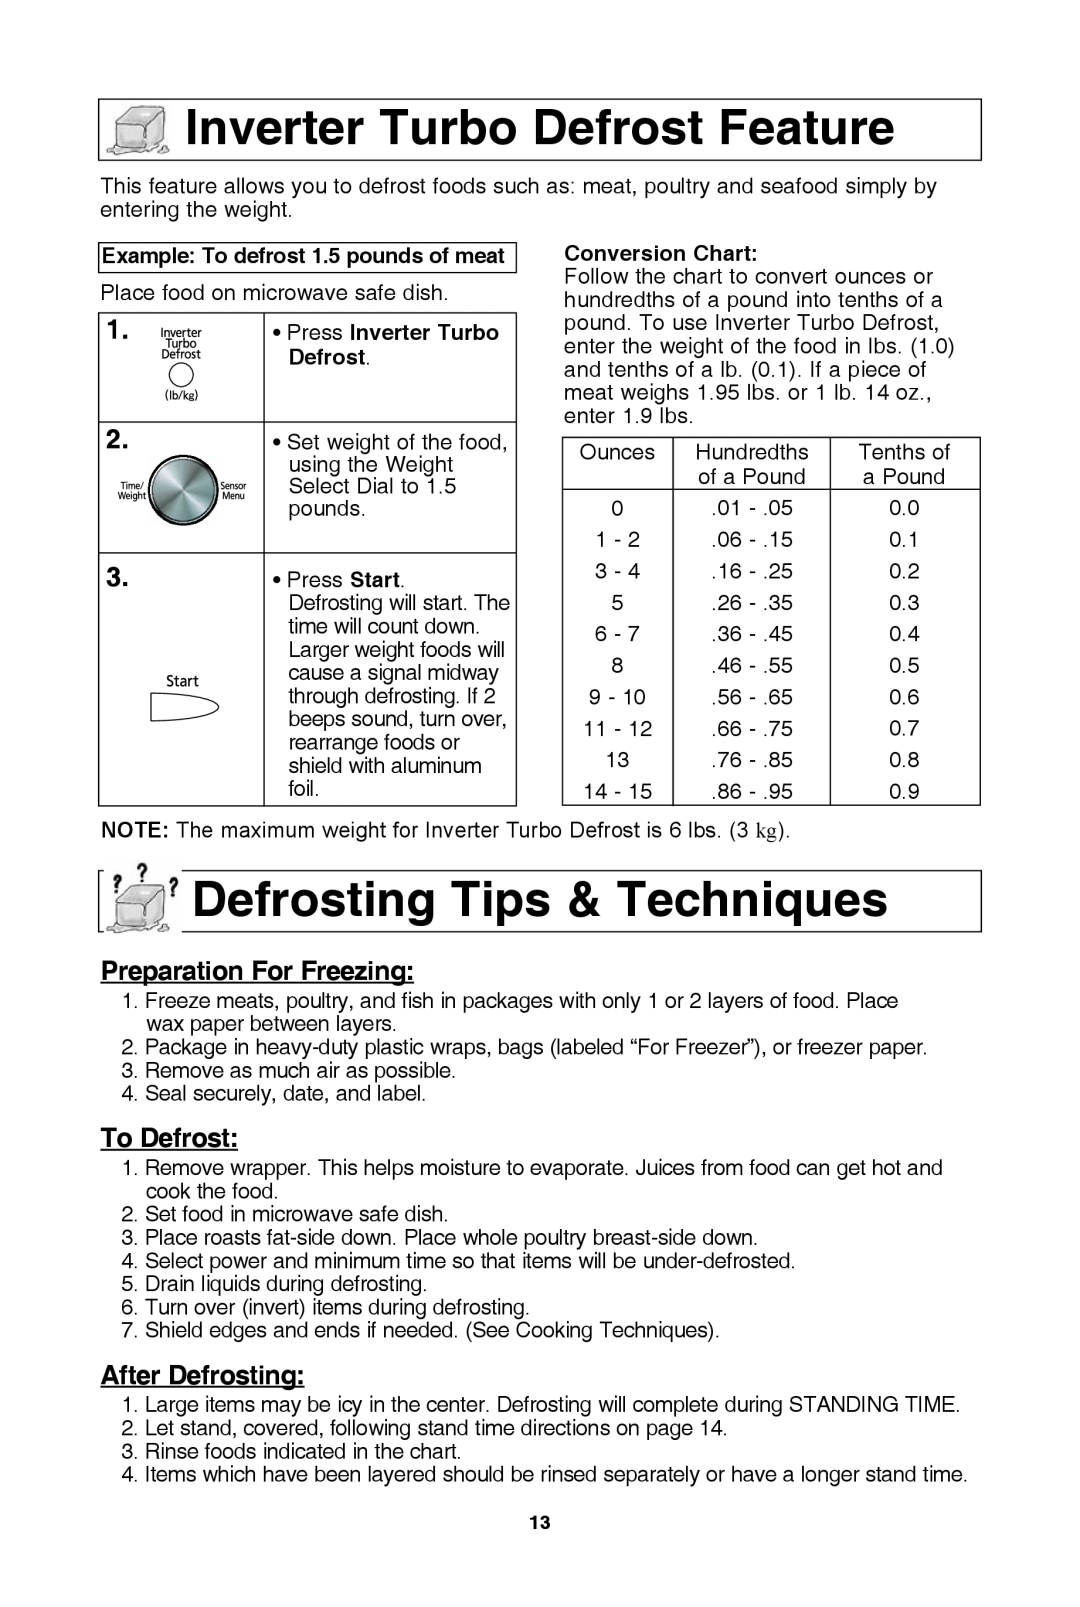 Panasonic NN-SD772S inverter turbo defrost feature, defrosting tips & techniques, Preparation for freezing, to defrost 